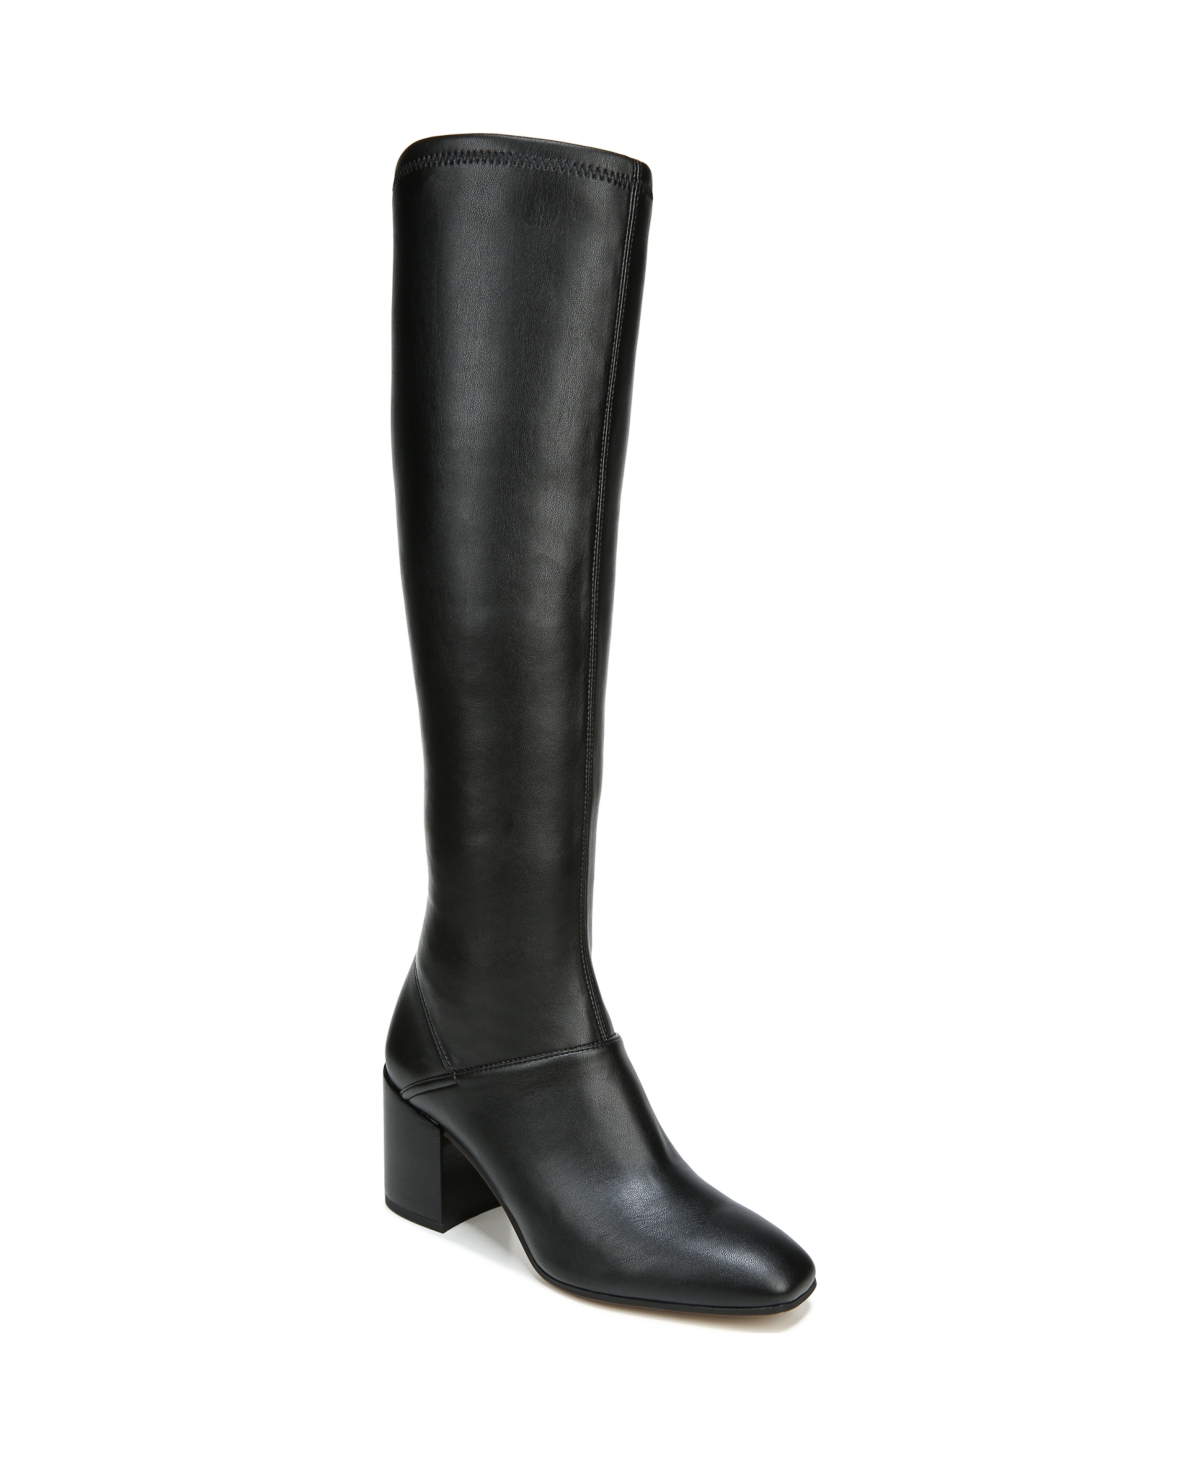 Tribute Wide Calf Knee High Boots - Black Faux Leather